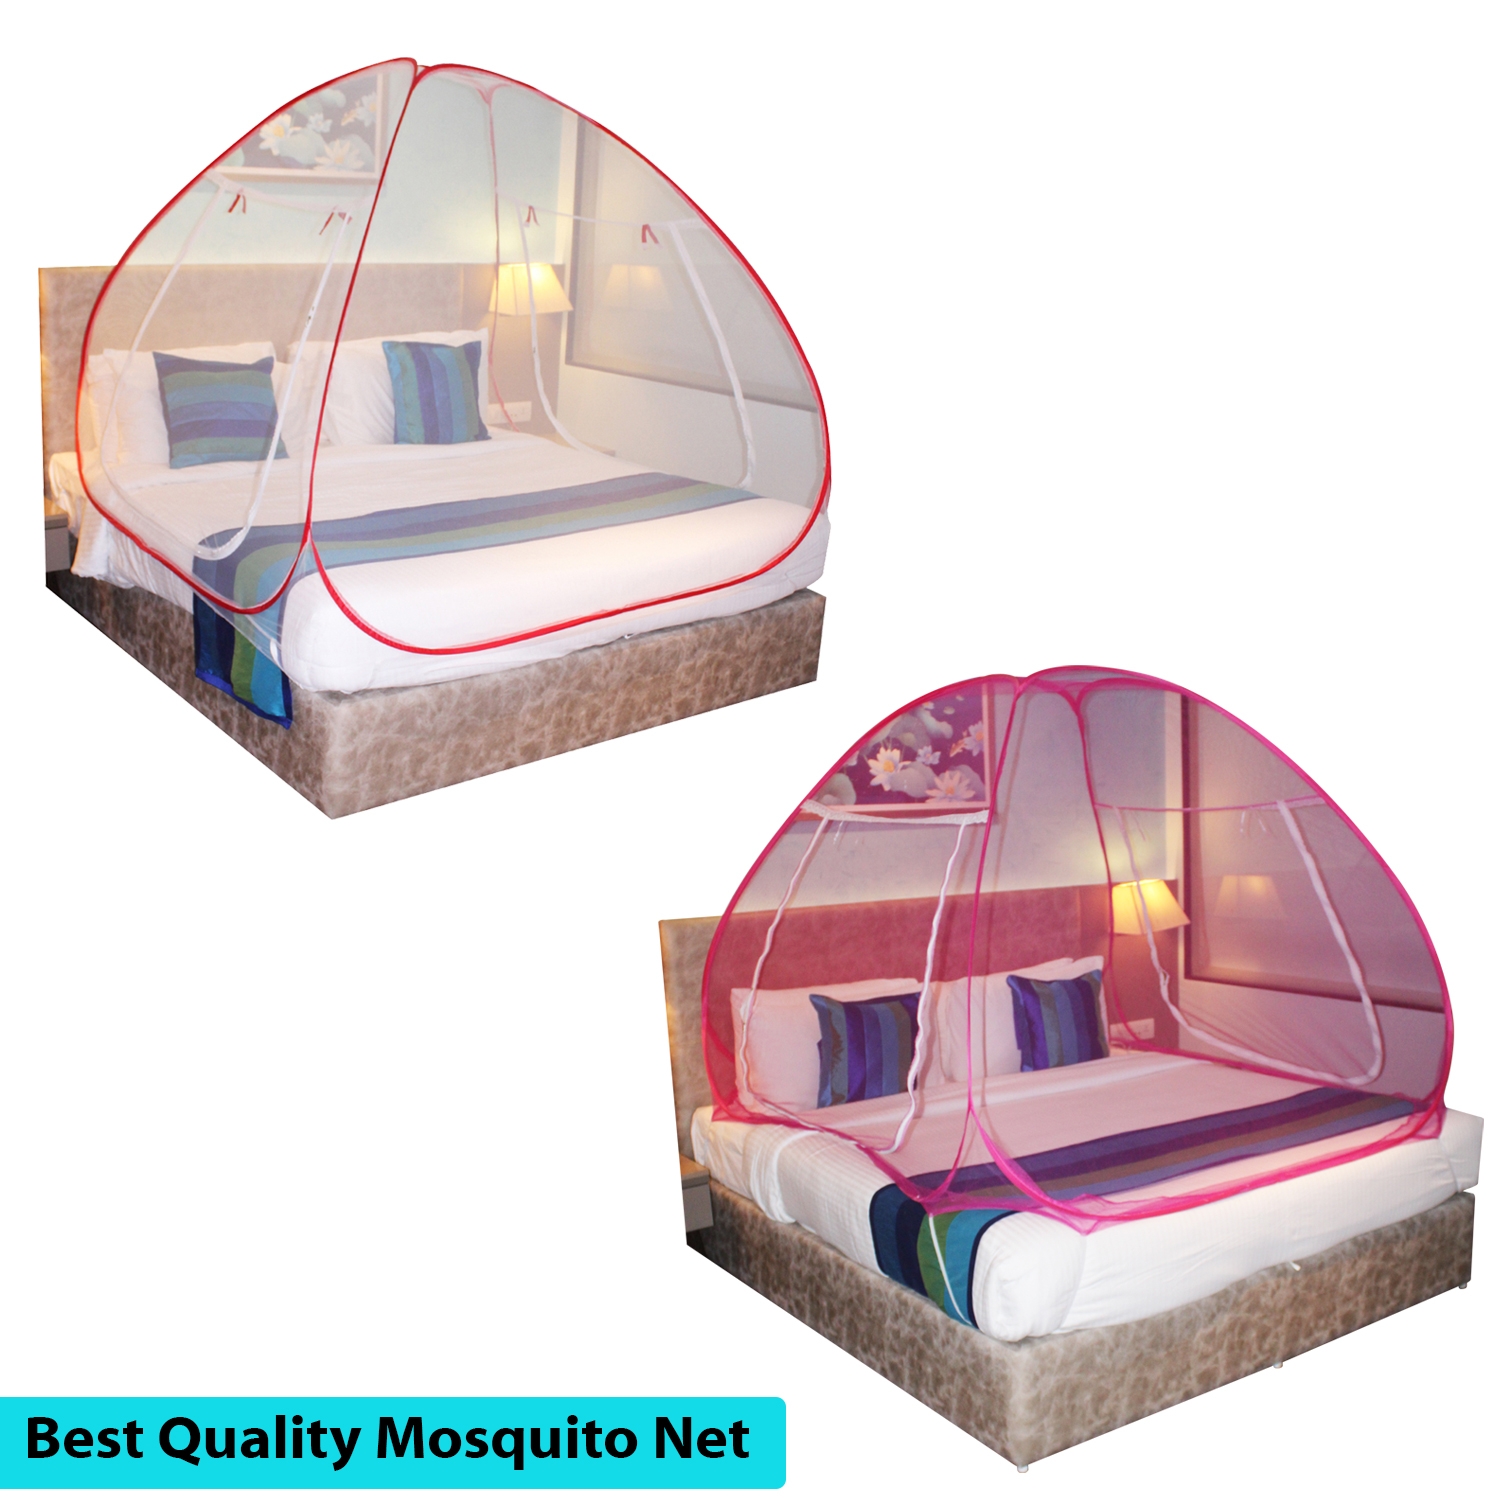 Paola Mosquito Net Combo Red Patti And Pink Foldable Double Bed Net King Size Easily Wash Pack Of 2 